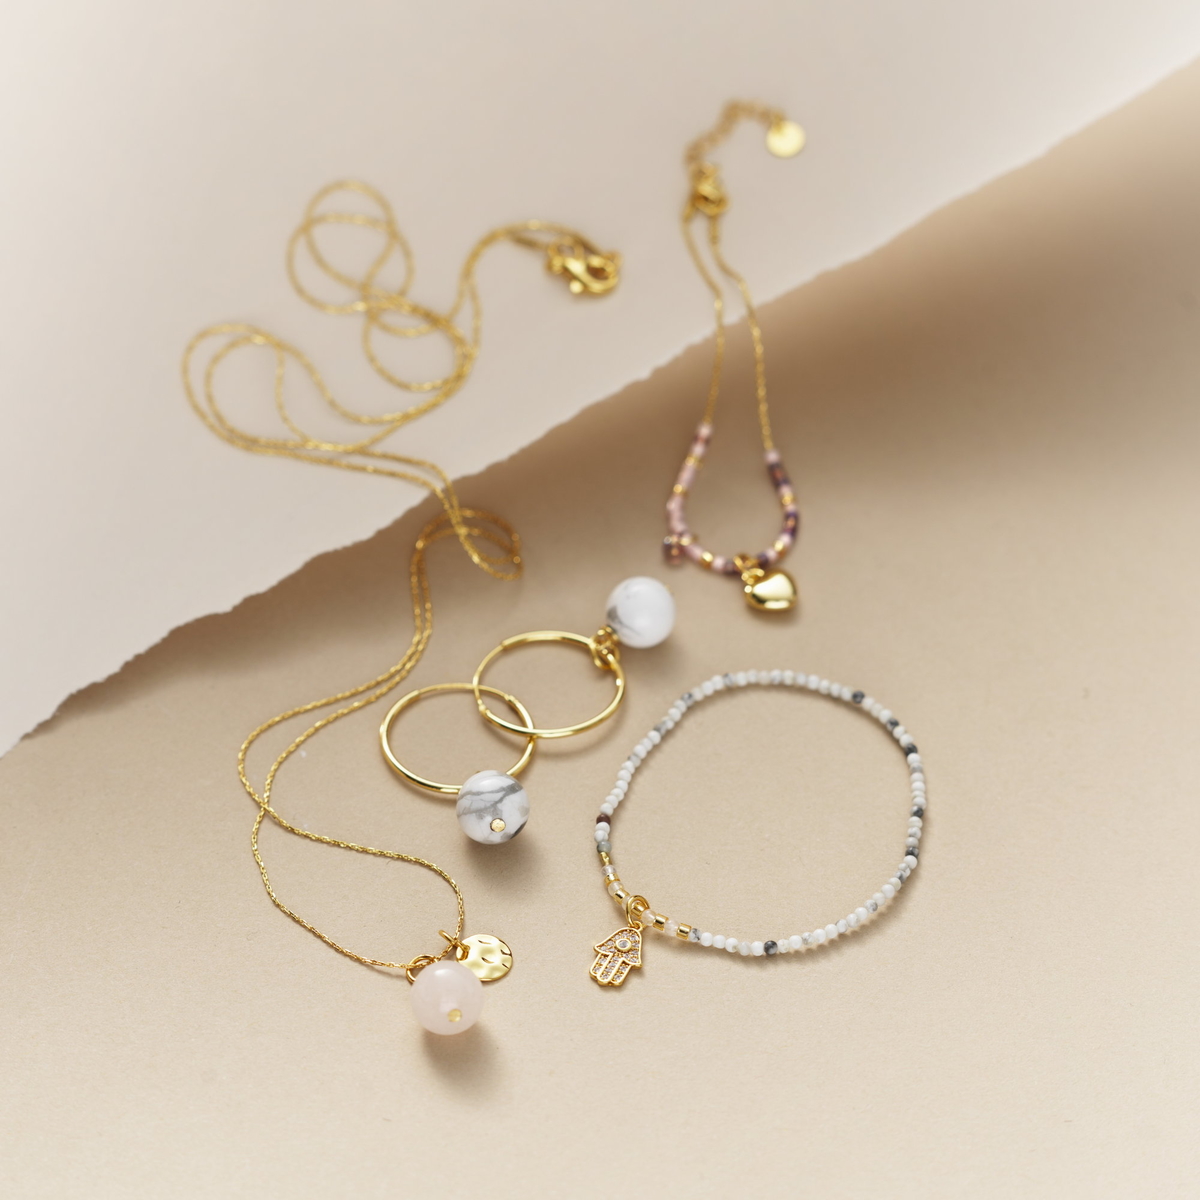 Make beautiful jewellery with golden flair